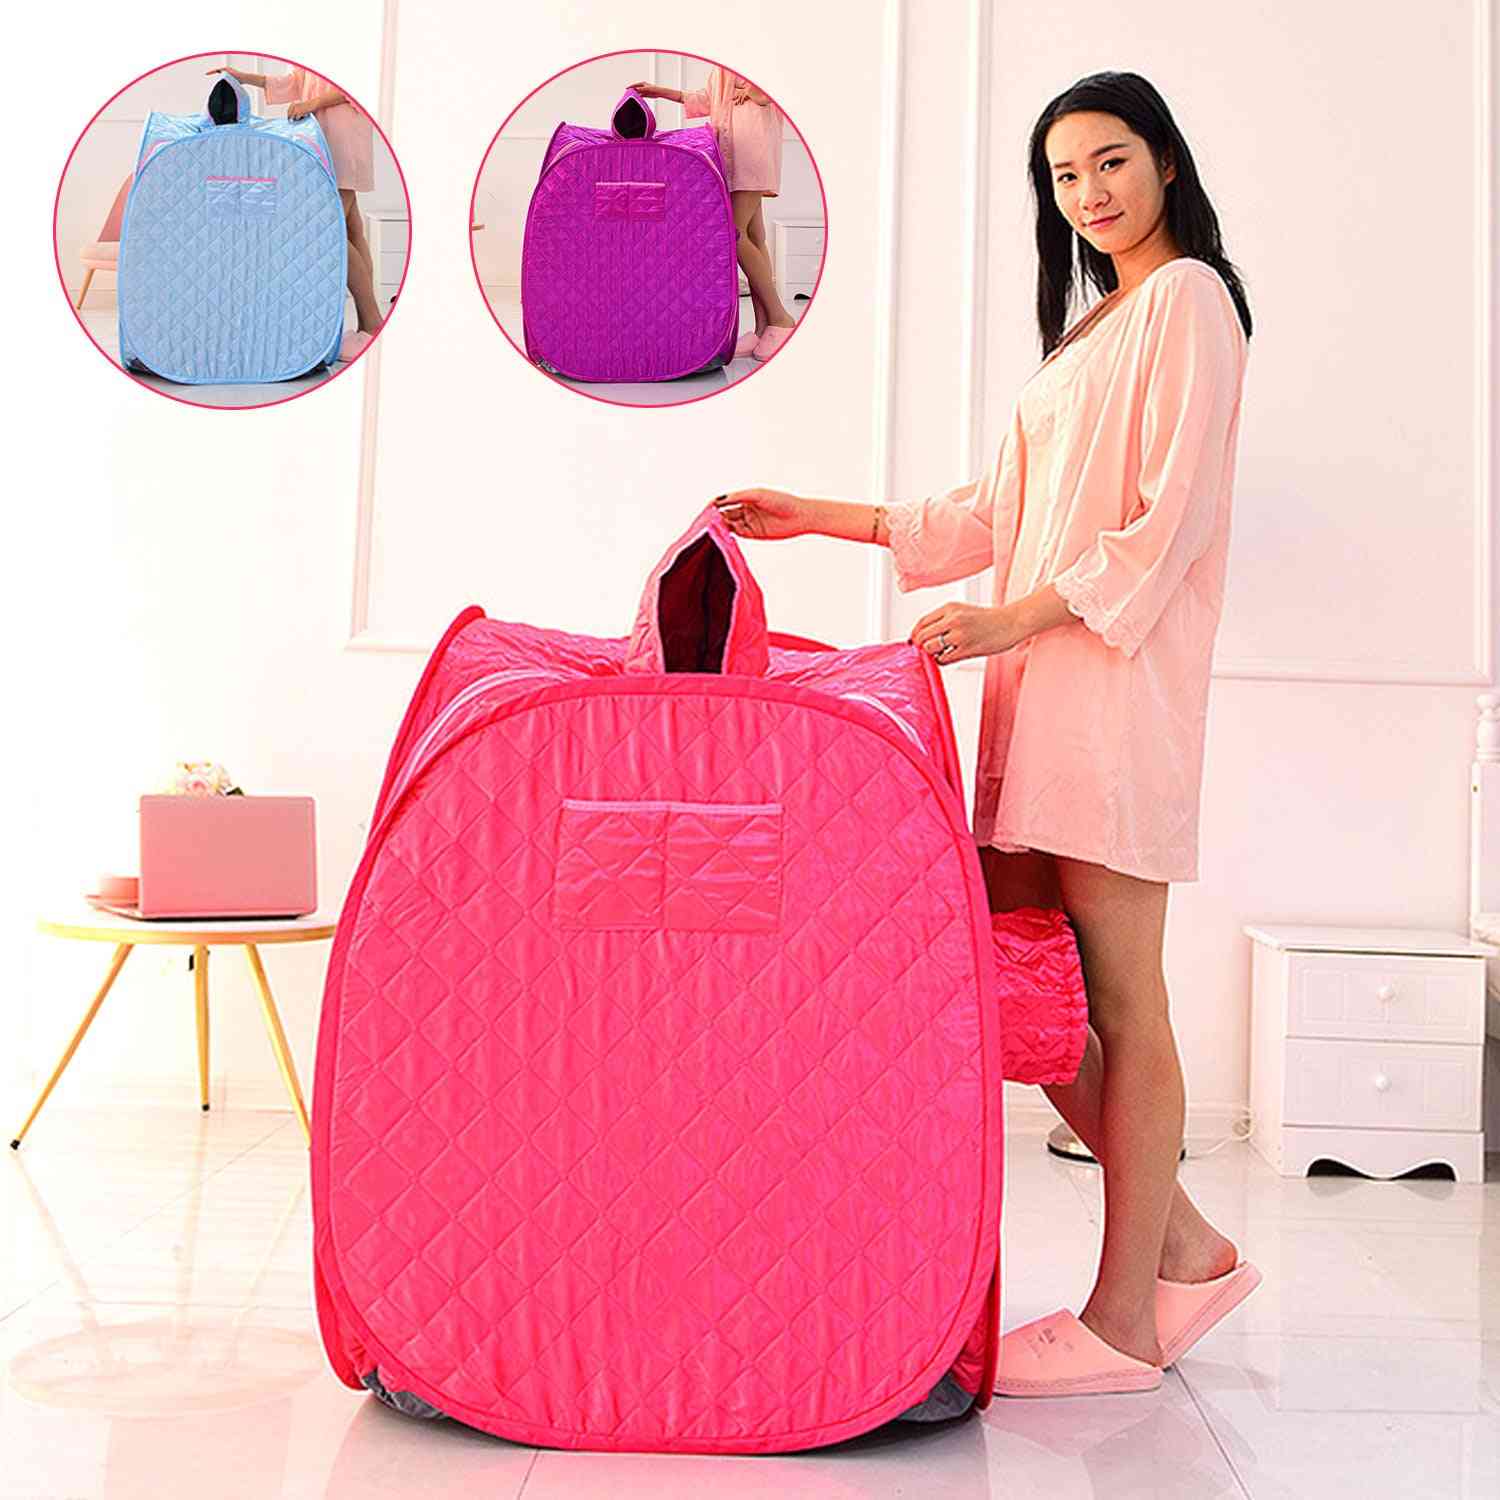 Portable Folding Steam Cabin Sauna Room, Tent Box Without Steamer For Weight Loss